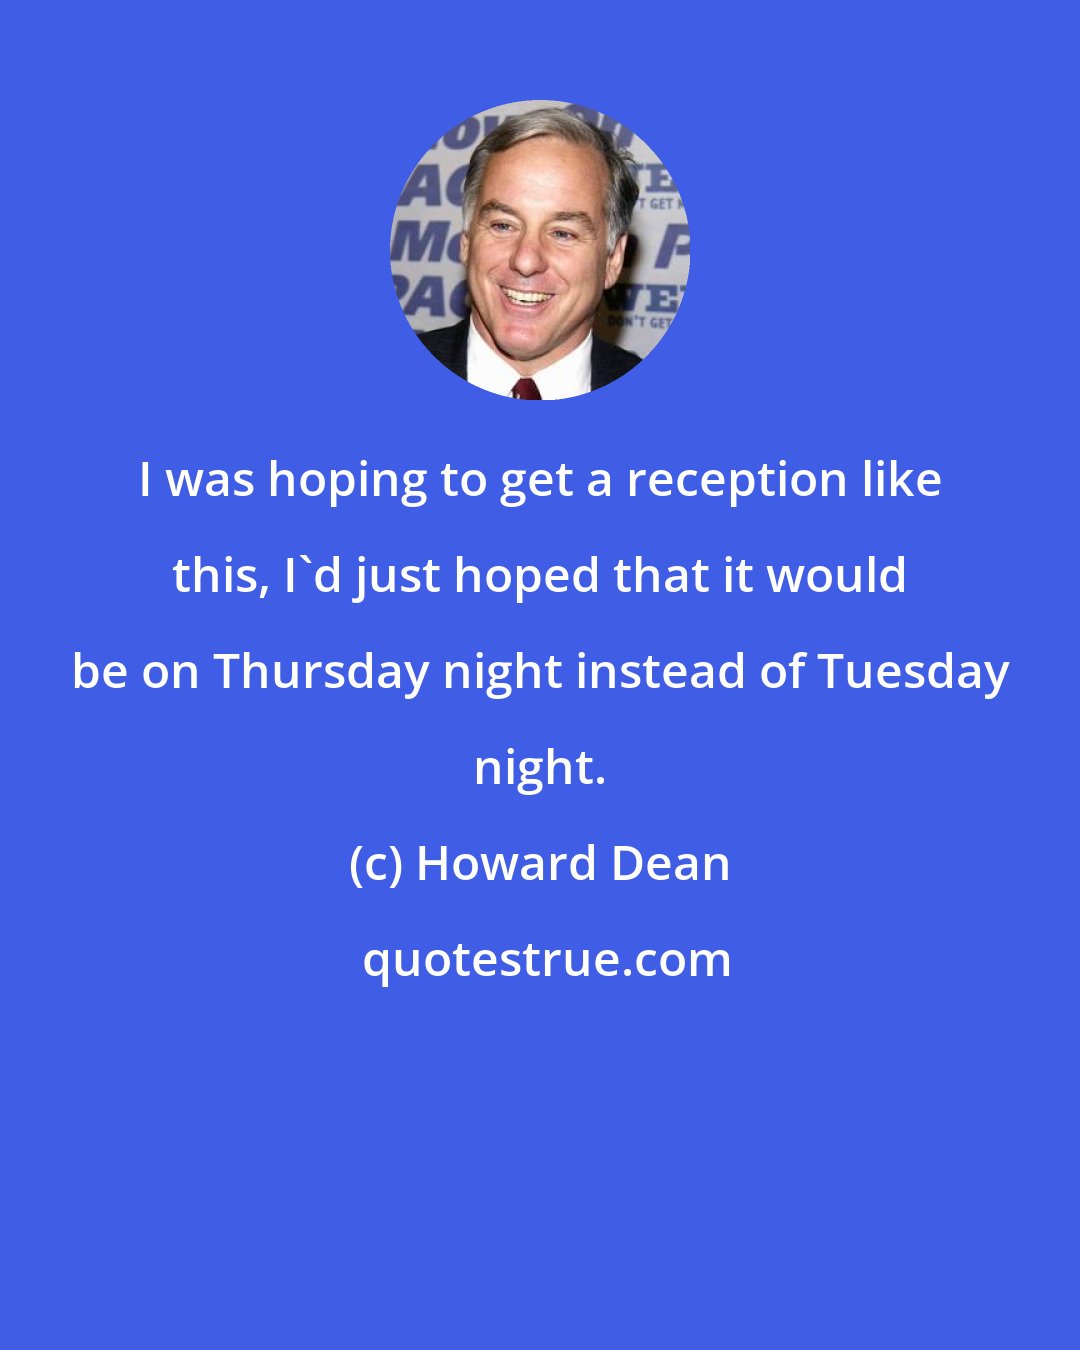 Howard Dean: I was hoping to get a reception like this, I'd just hoped that it would be on Thursday night instead of Tuesday night.